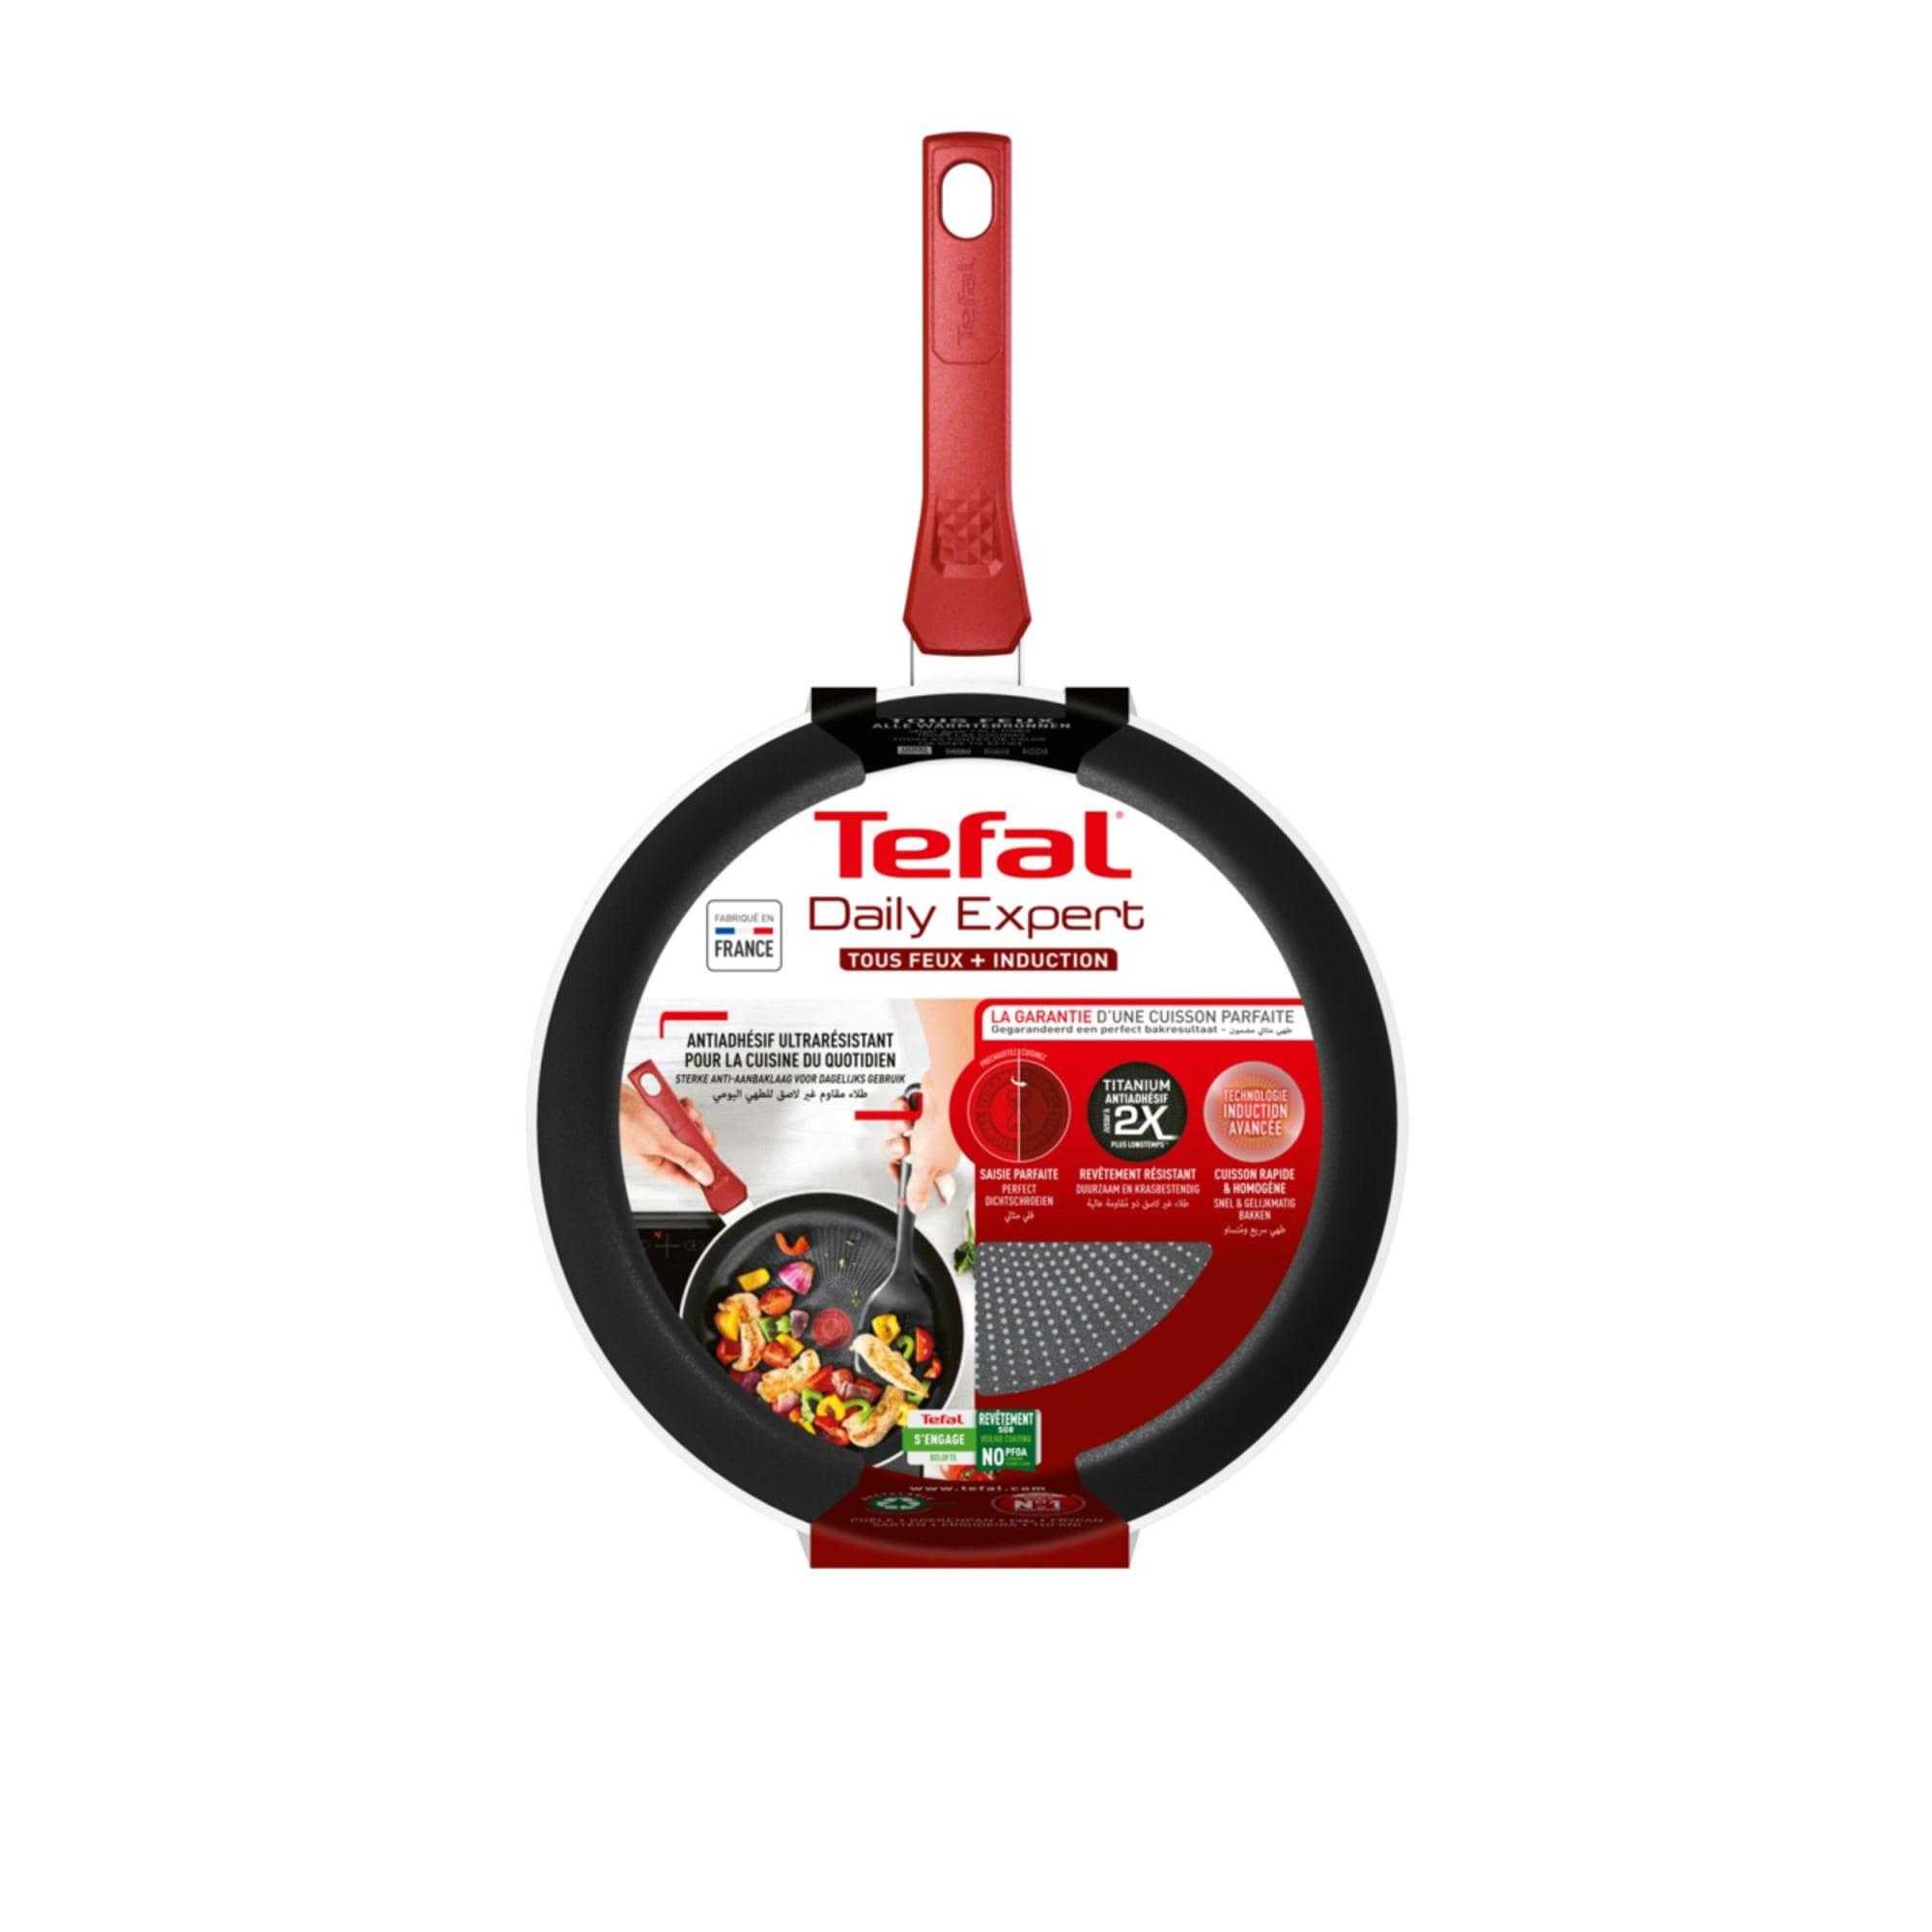 Tefal Daily Expert Frypan 32cm Red Image 4